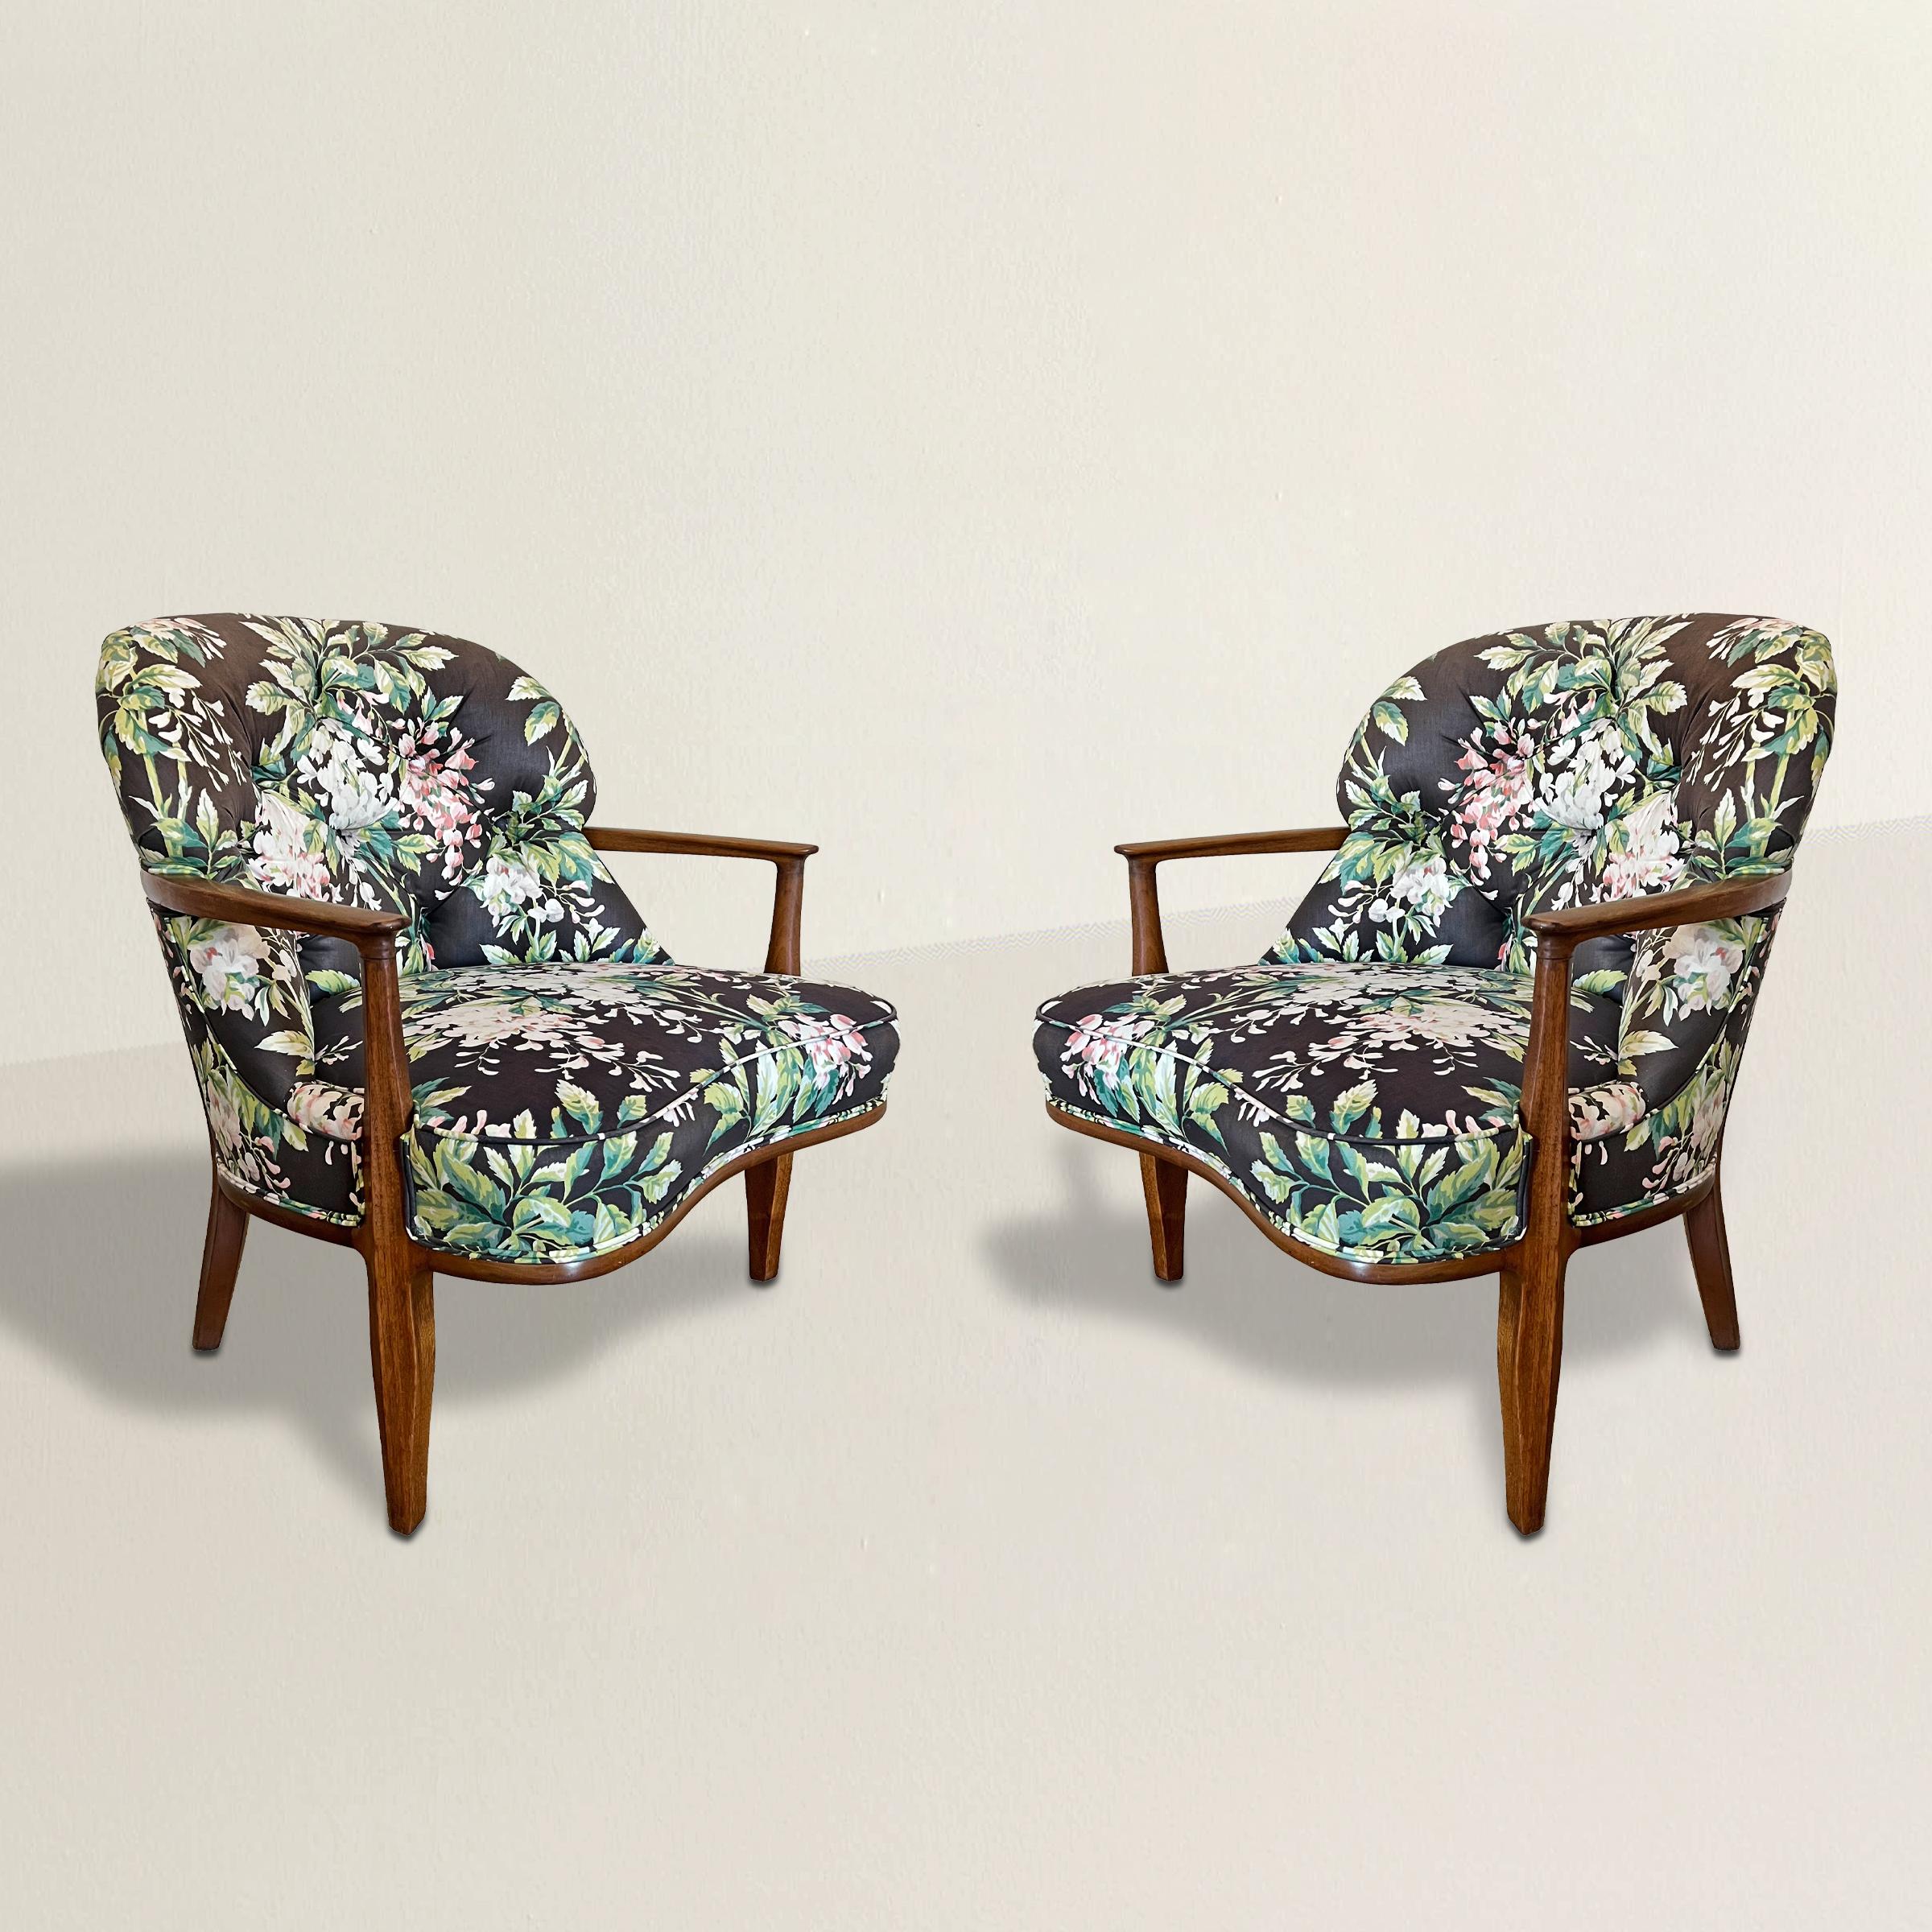 A chic and playful pair of mid-20th century Janus lounge chairs designed by Edward Wormley for American furniture manufacturer Dunbar, with walnut frames and their original floral chintz upholstery.